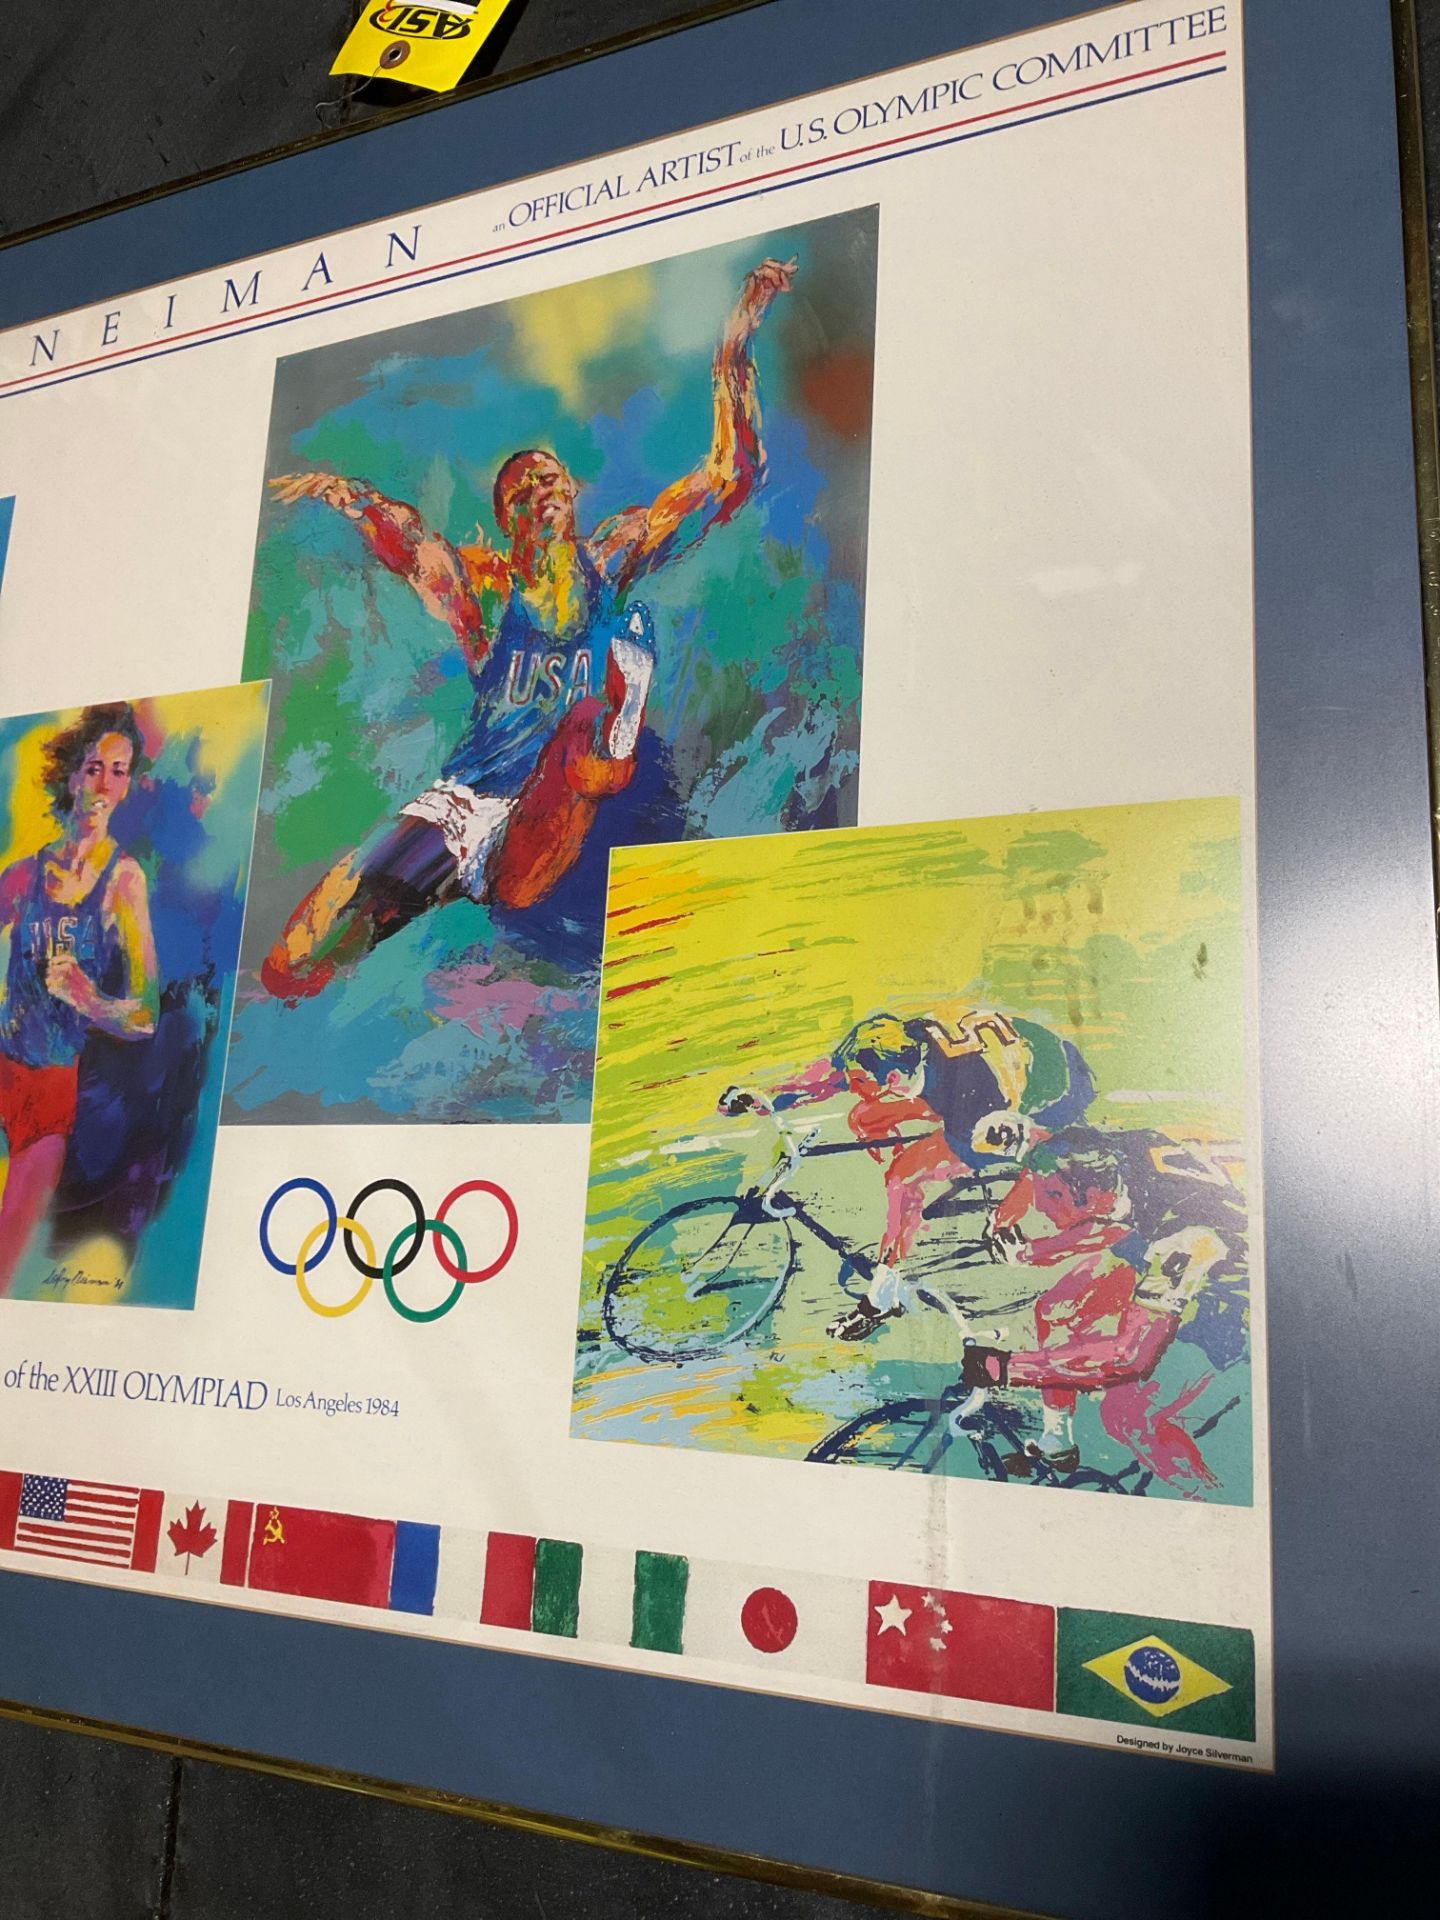 LEROY NEIMAN GAMES OF THE XXIII OLYMPIAD LOS ANGELES 1984 IN FRAME, APPROXIMATELY 37€ L X 27€ W - Image 2 of 3